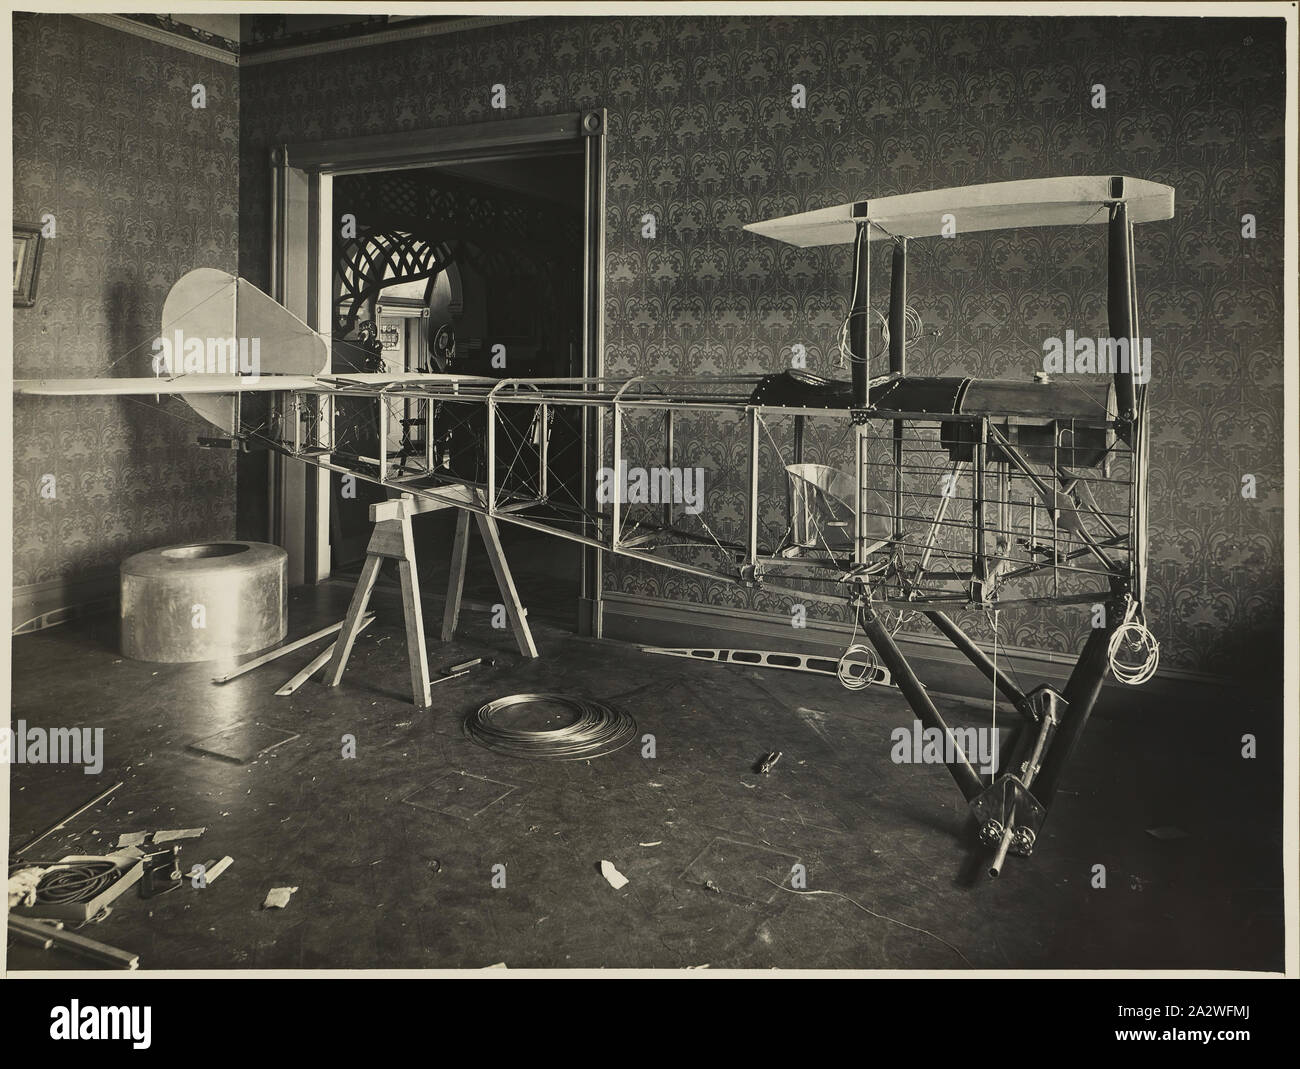 Photograph - Fuselage of Basil Watson's Partially Constructed Biplane in the Family Home, Elsternwick, Victoria, 1916, Part of a commemorative photograph album produced by Sears' Studios, Melbourne, documenting the work of Basil Watson in constructing a biplane at his family's home 'Foilacleugh' in Elsternwick, Victoria, during 1916, and the aftermath of his fatal crash off Point Cook on 28th March 1917. The biplane was based on the design of the Sopwith Pup Stock Photo